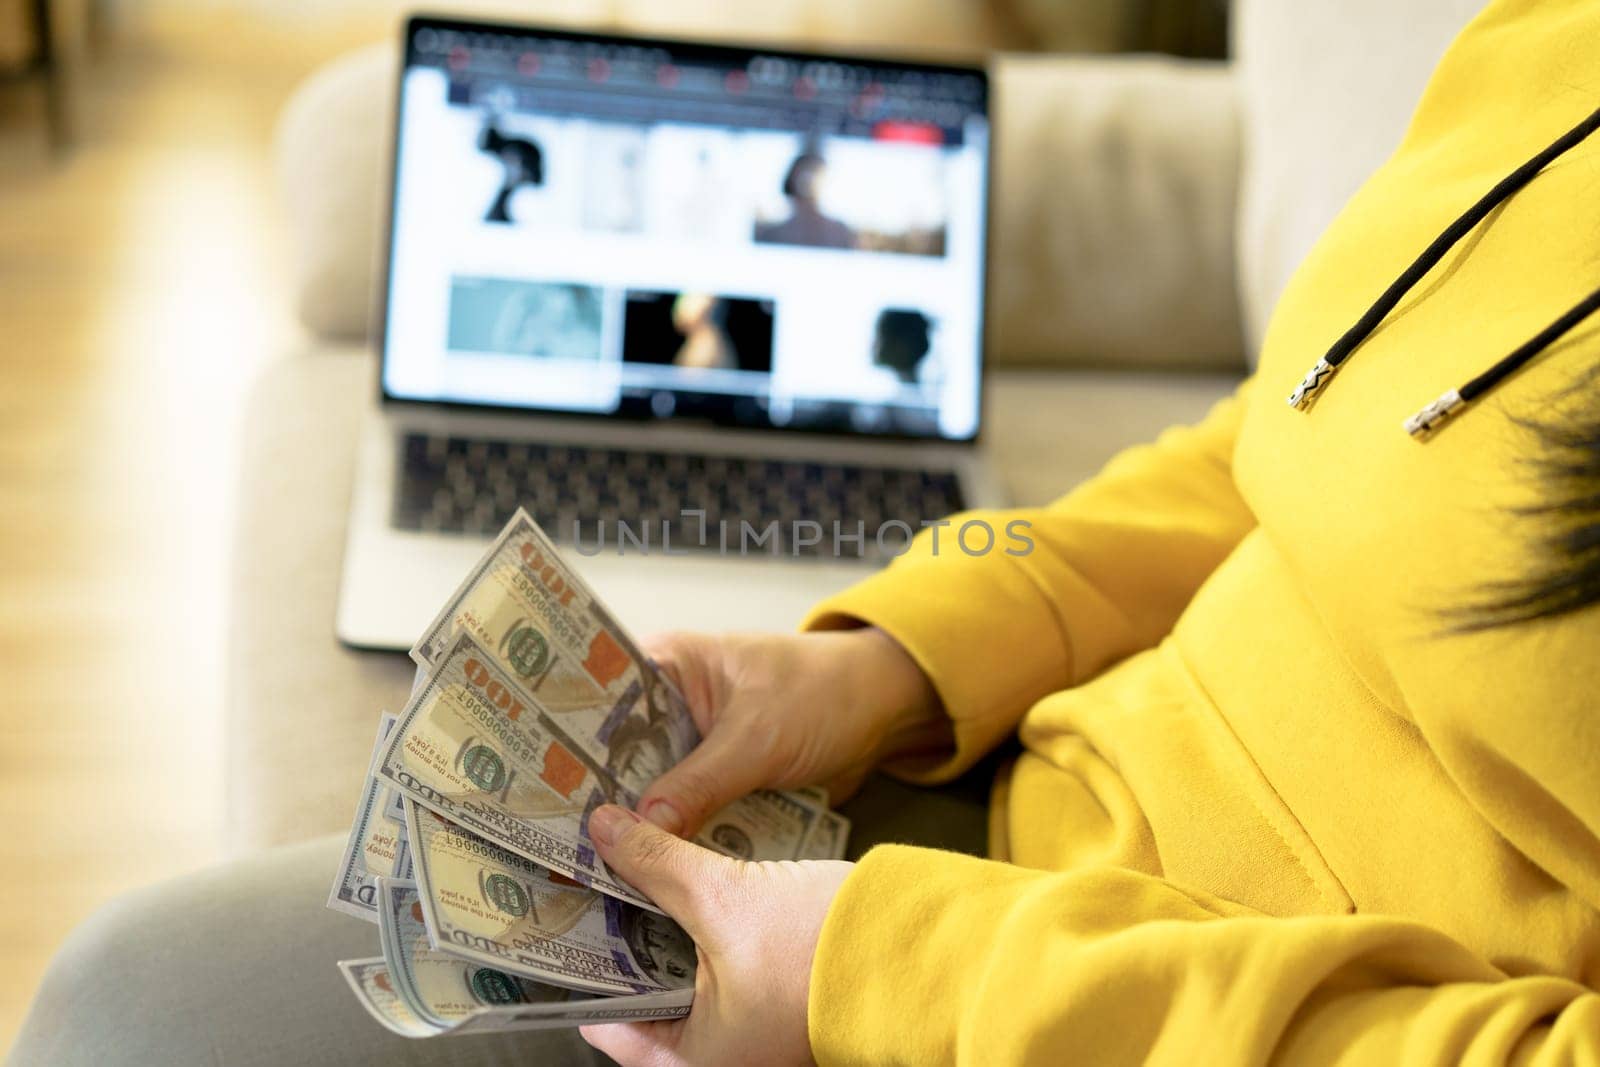 Successful online business concept hands counting dollar bills background of open laptop. It conveys idea of financial success, wealth management, and profitability, providing inspiring image for business and finance-related projects. by LipikStockMedia